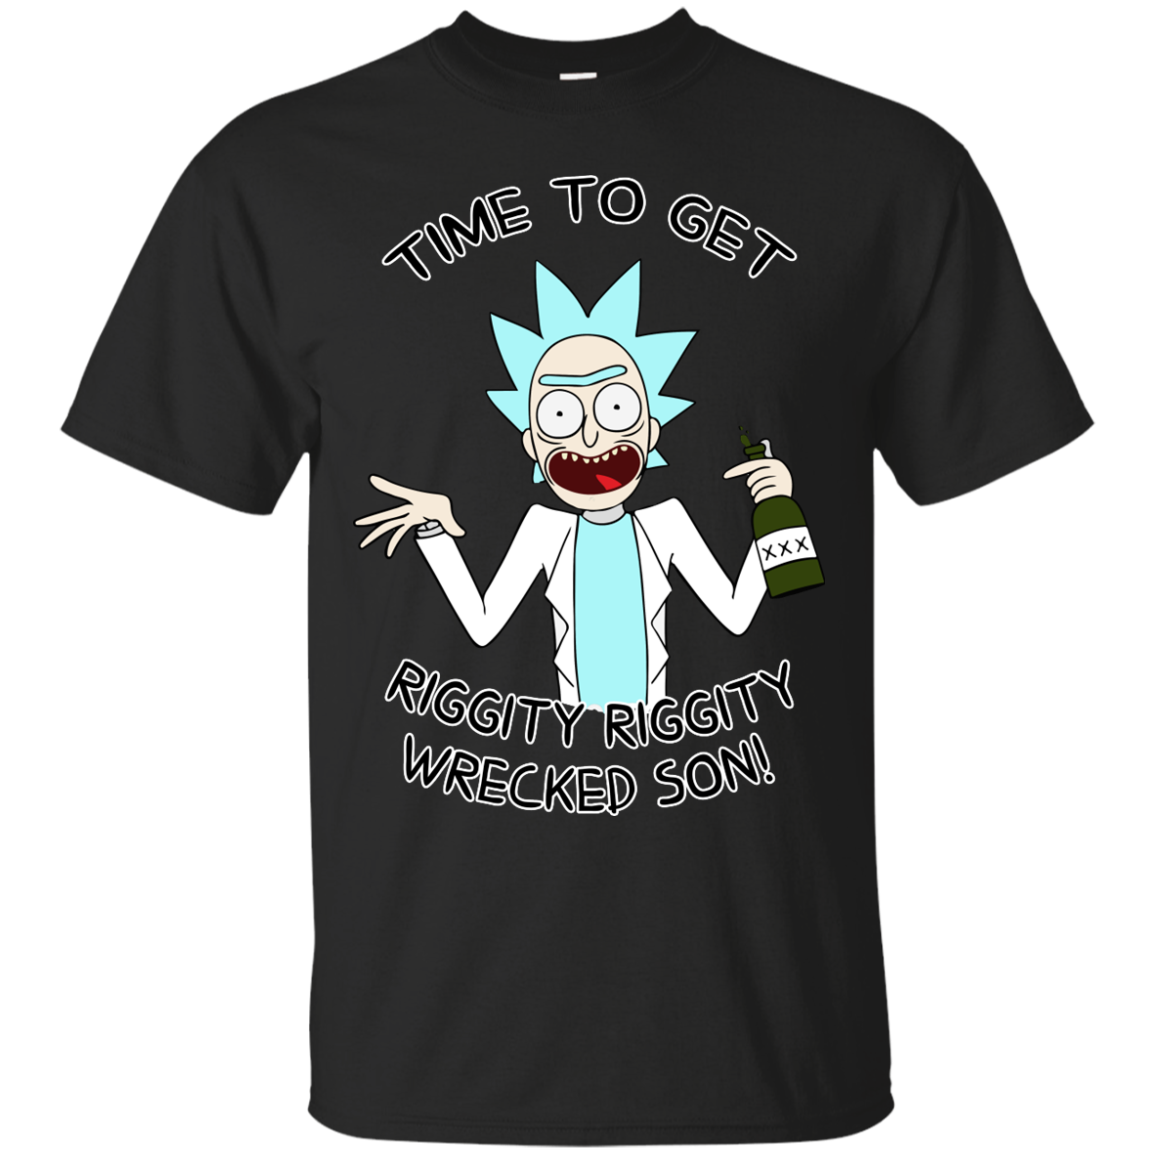 Time To Get Riggity Riggity Wrecked Son T-Shirt, Tank Top